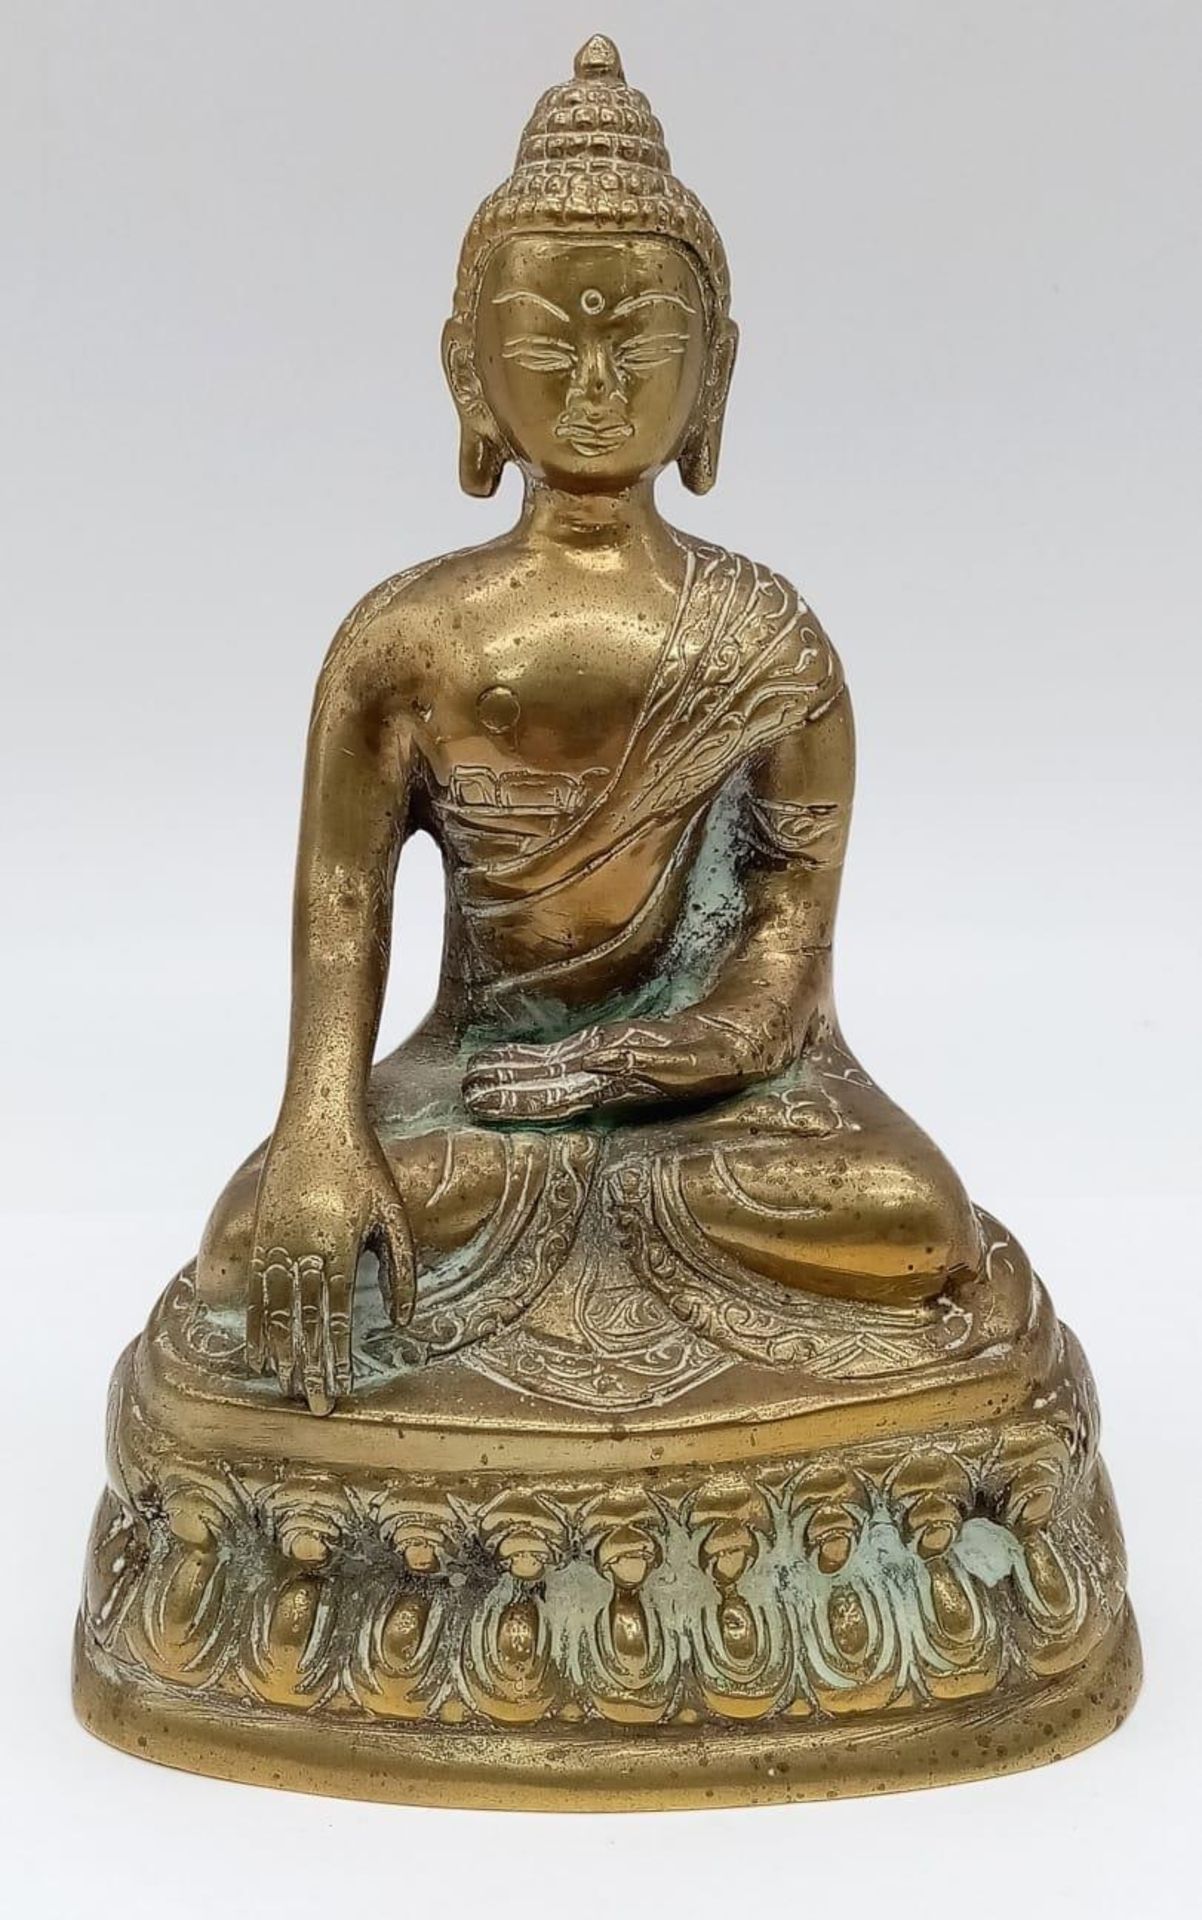 An Excellent Condition Heavy Cast Bronze Seated Buddha Statue. 17cm Tall. 823 Grams.